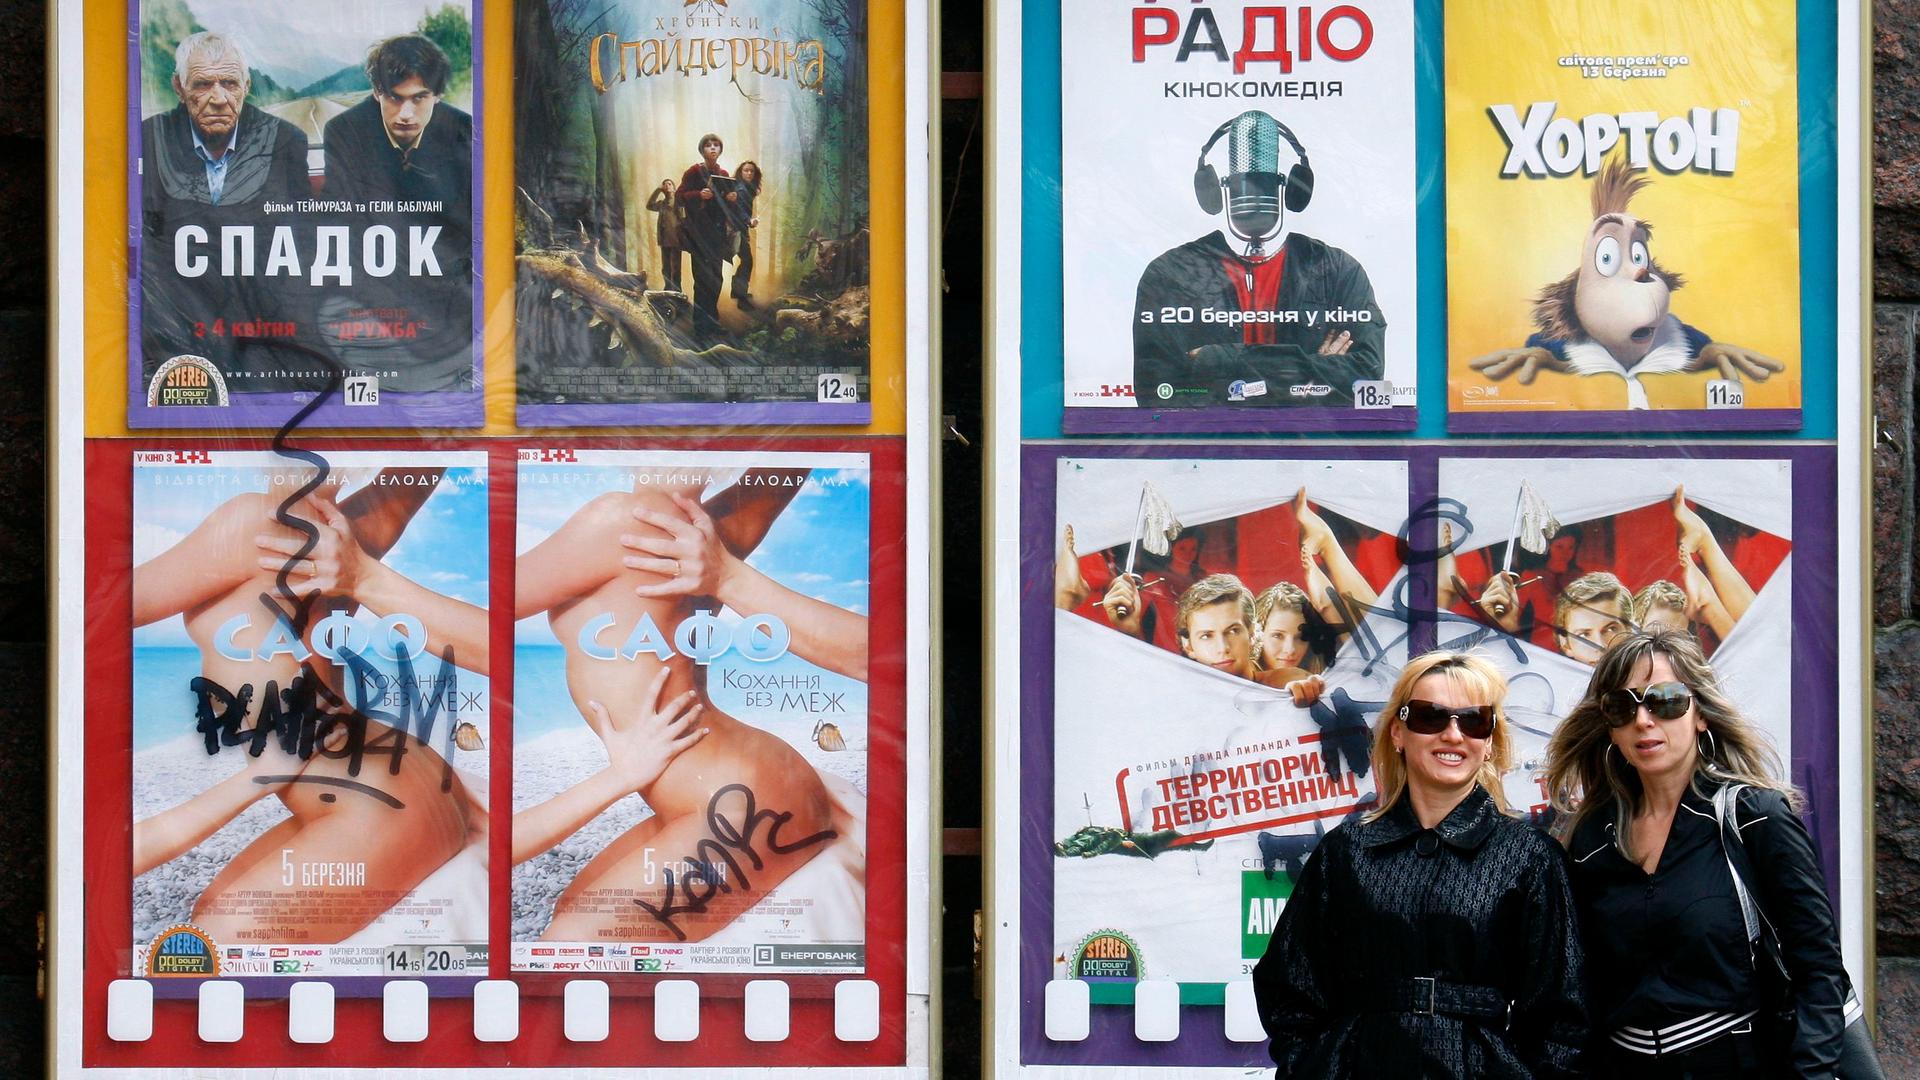 Women walk past a movie theater in central Kiev. Cinemas are the new testing ground in the debate over how to promote the Ukrainian language in the country of 46 million after centuries of dominance from Moscow.